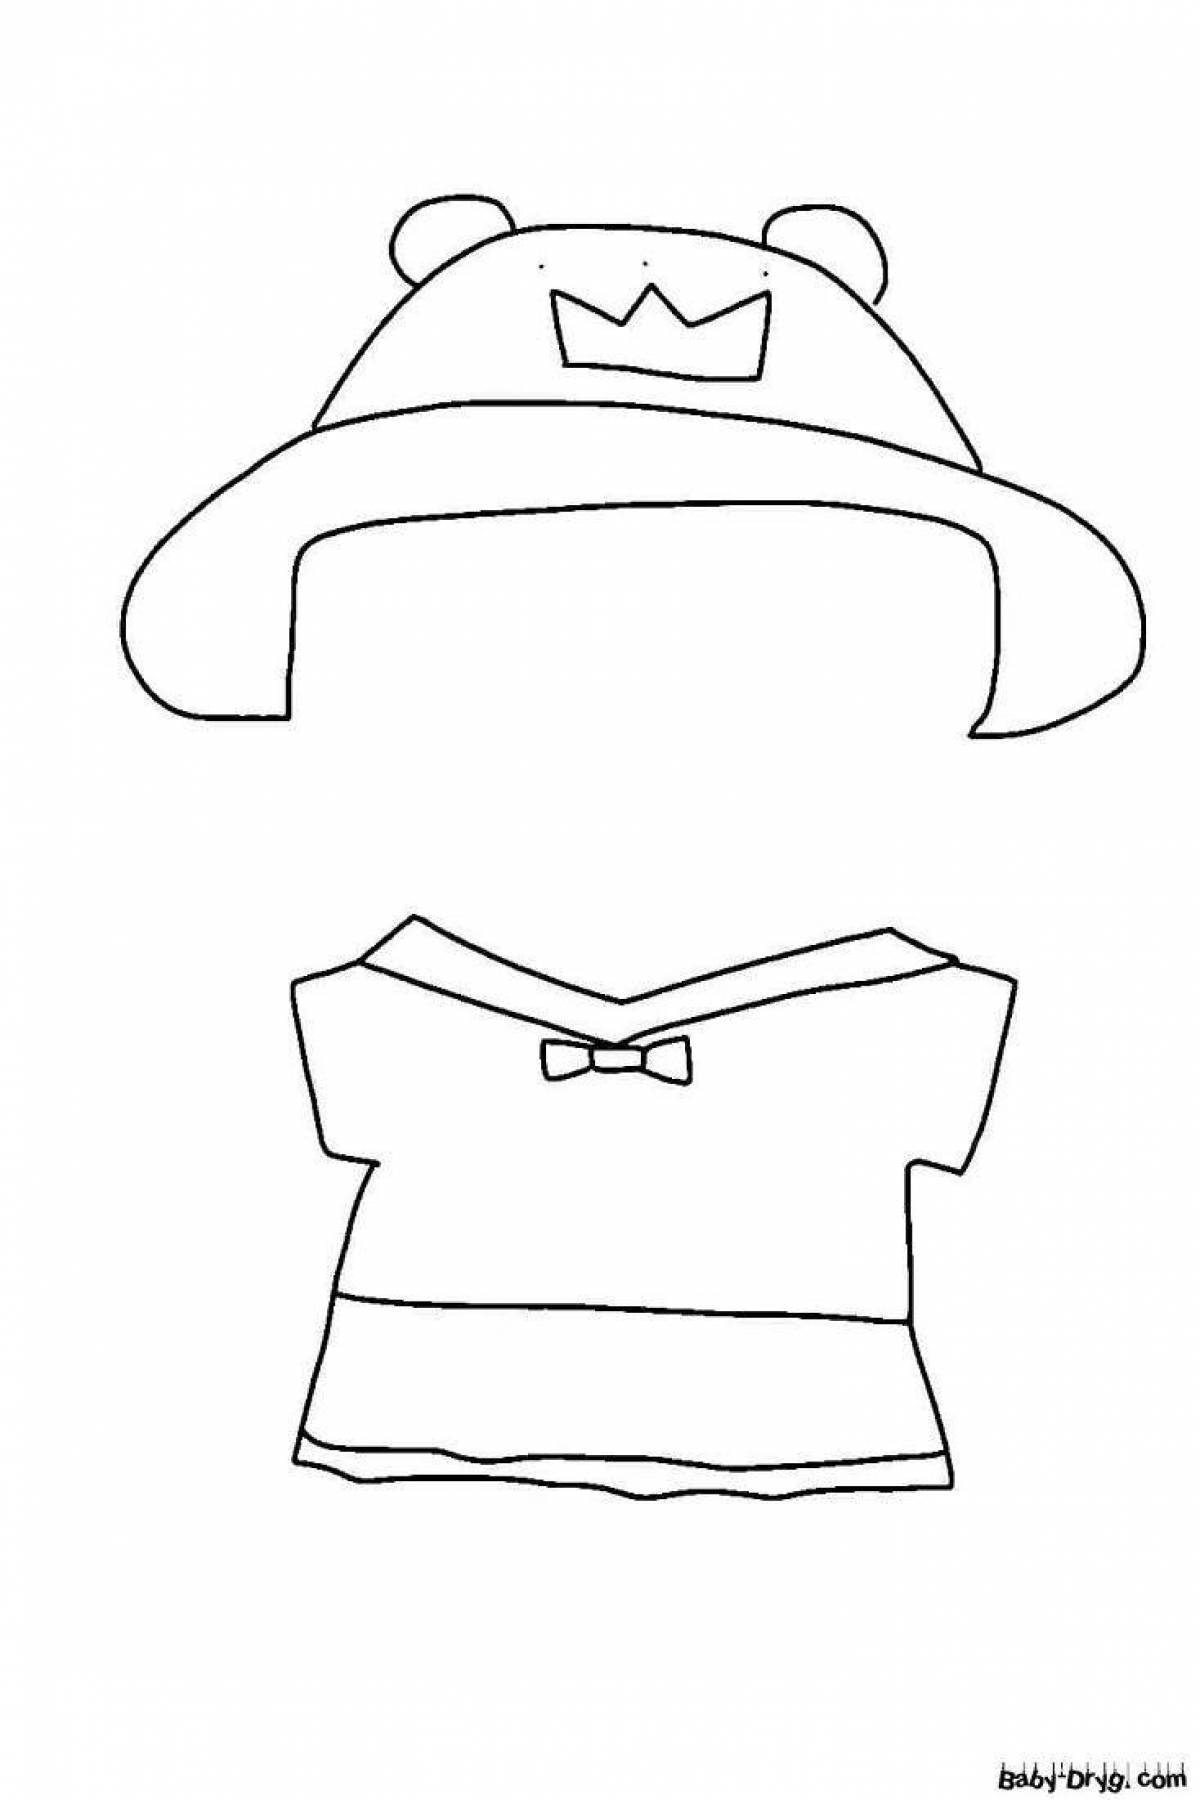 Coloring page cute dressed duck